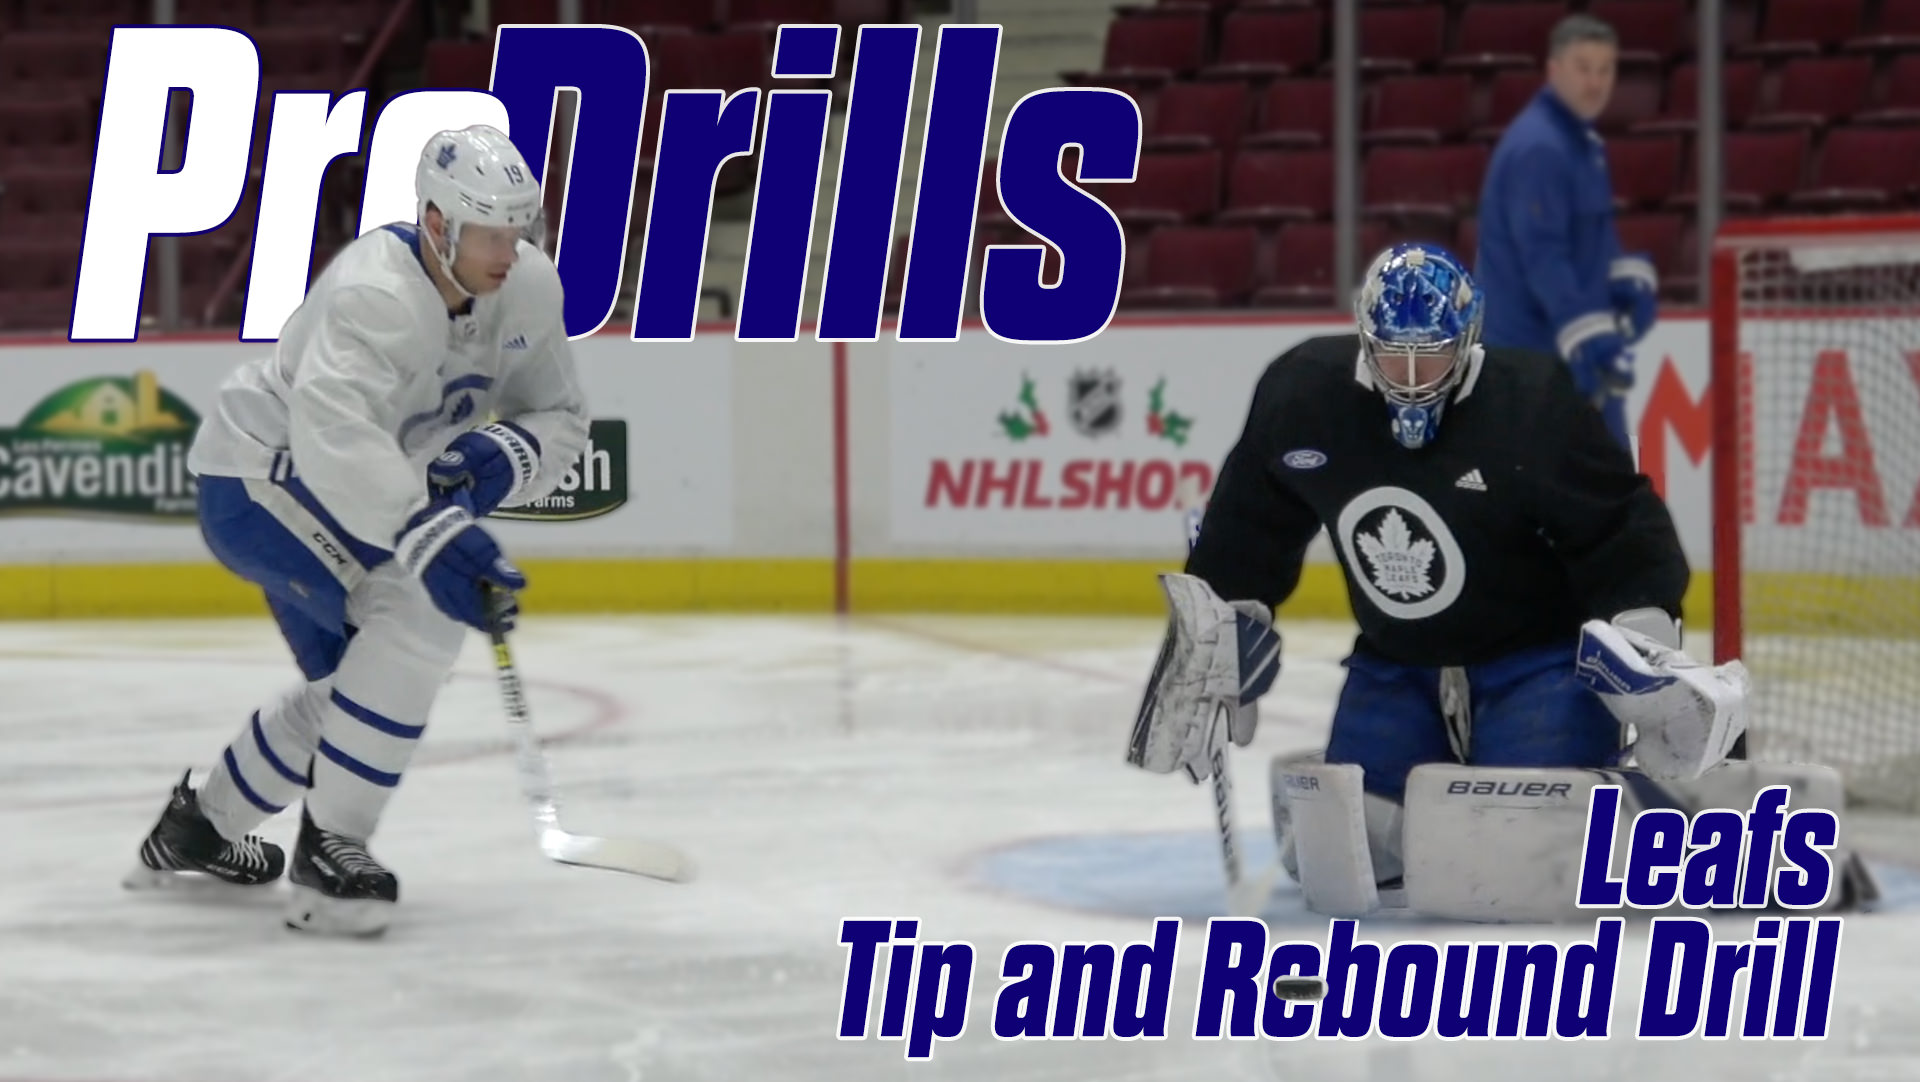 Pro-Drills: Maple Leafs tip and rebound drill with Frederik Andersen and Michael Hutchinson